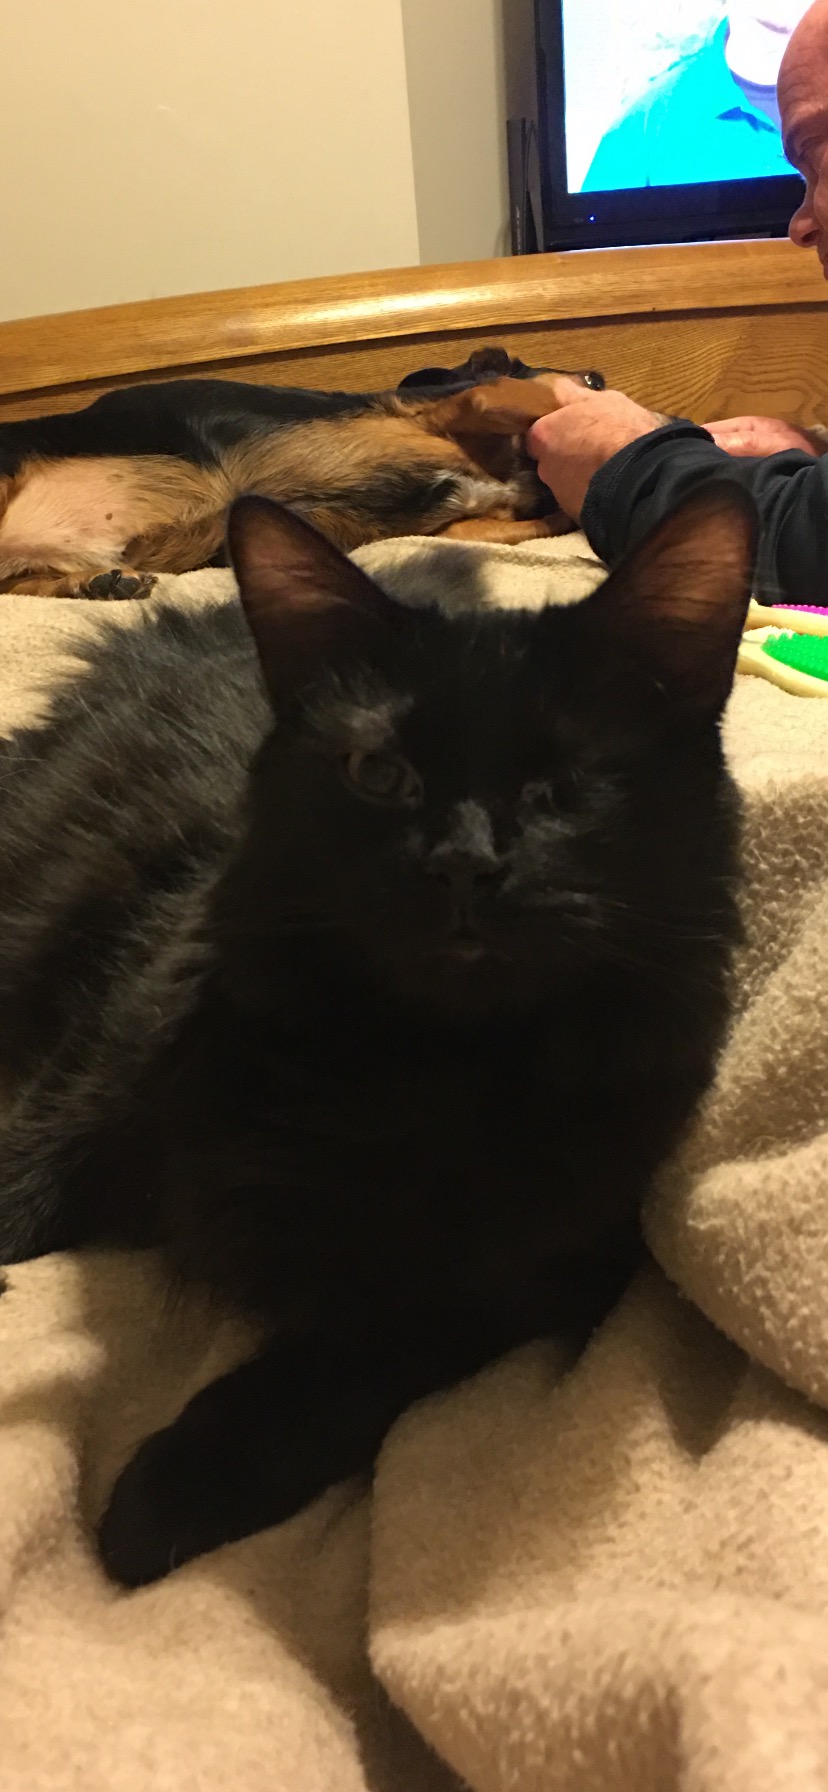 Image of Willie, Lost Cat